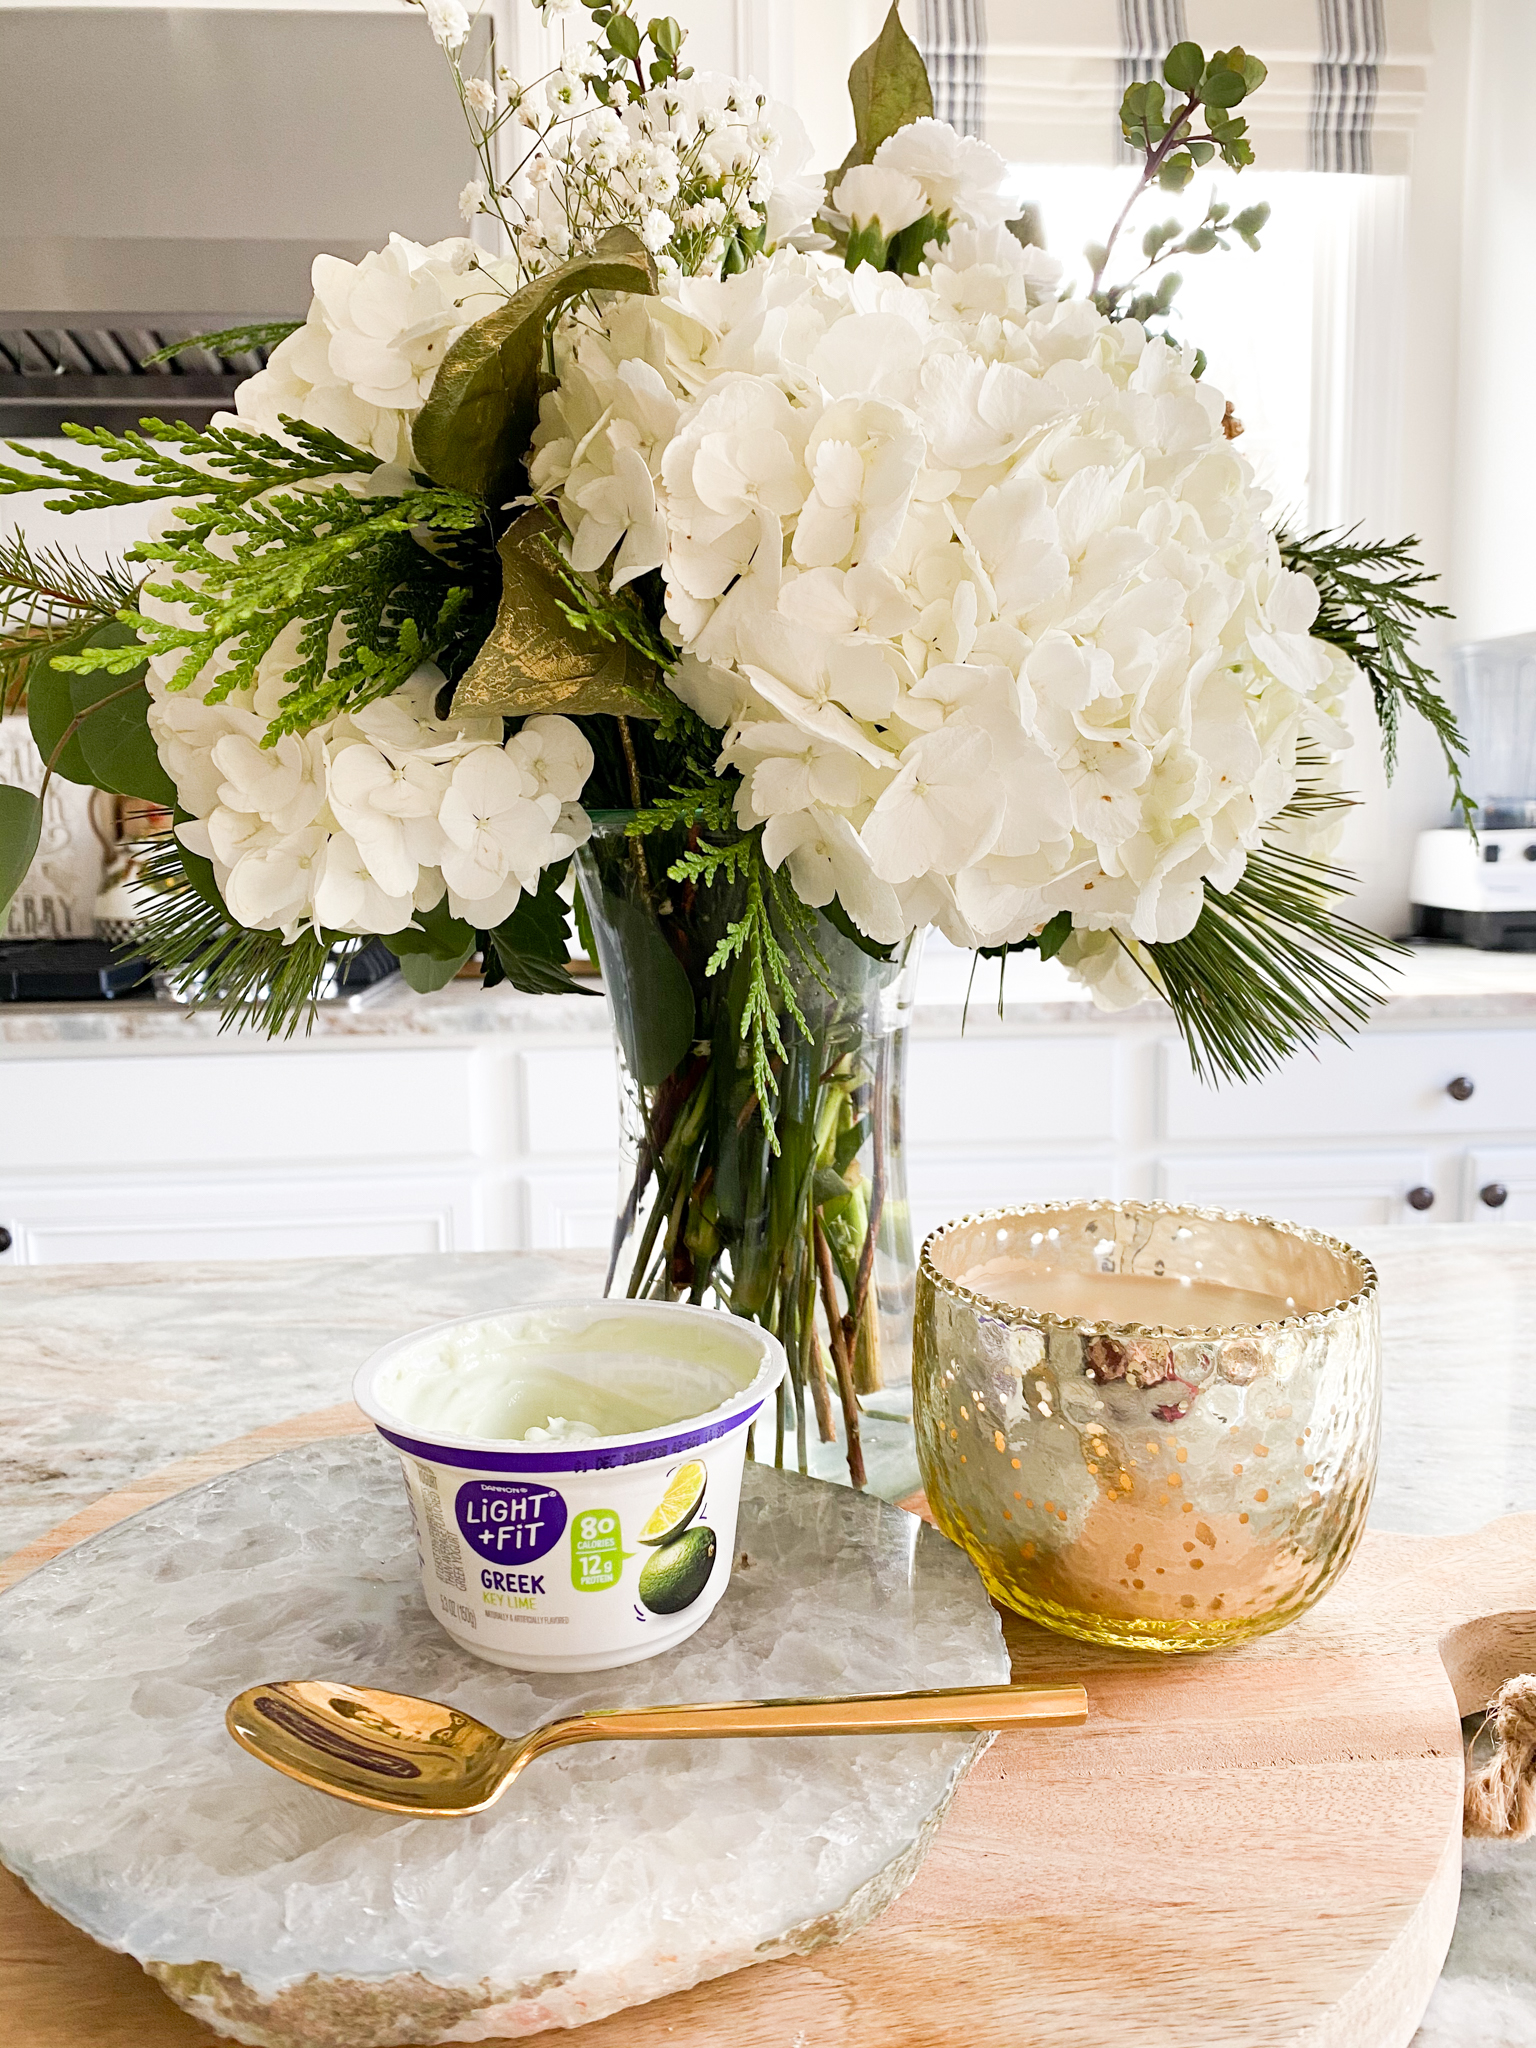 Making Goals by popular Ohio lifestyle blog, Coffee Beans and Bobby Pins: image of Danon Light + Fit Greek yogurt cup next to a gold spoon, vase of white flowers, and a gold candle votive. 